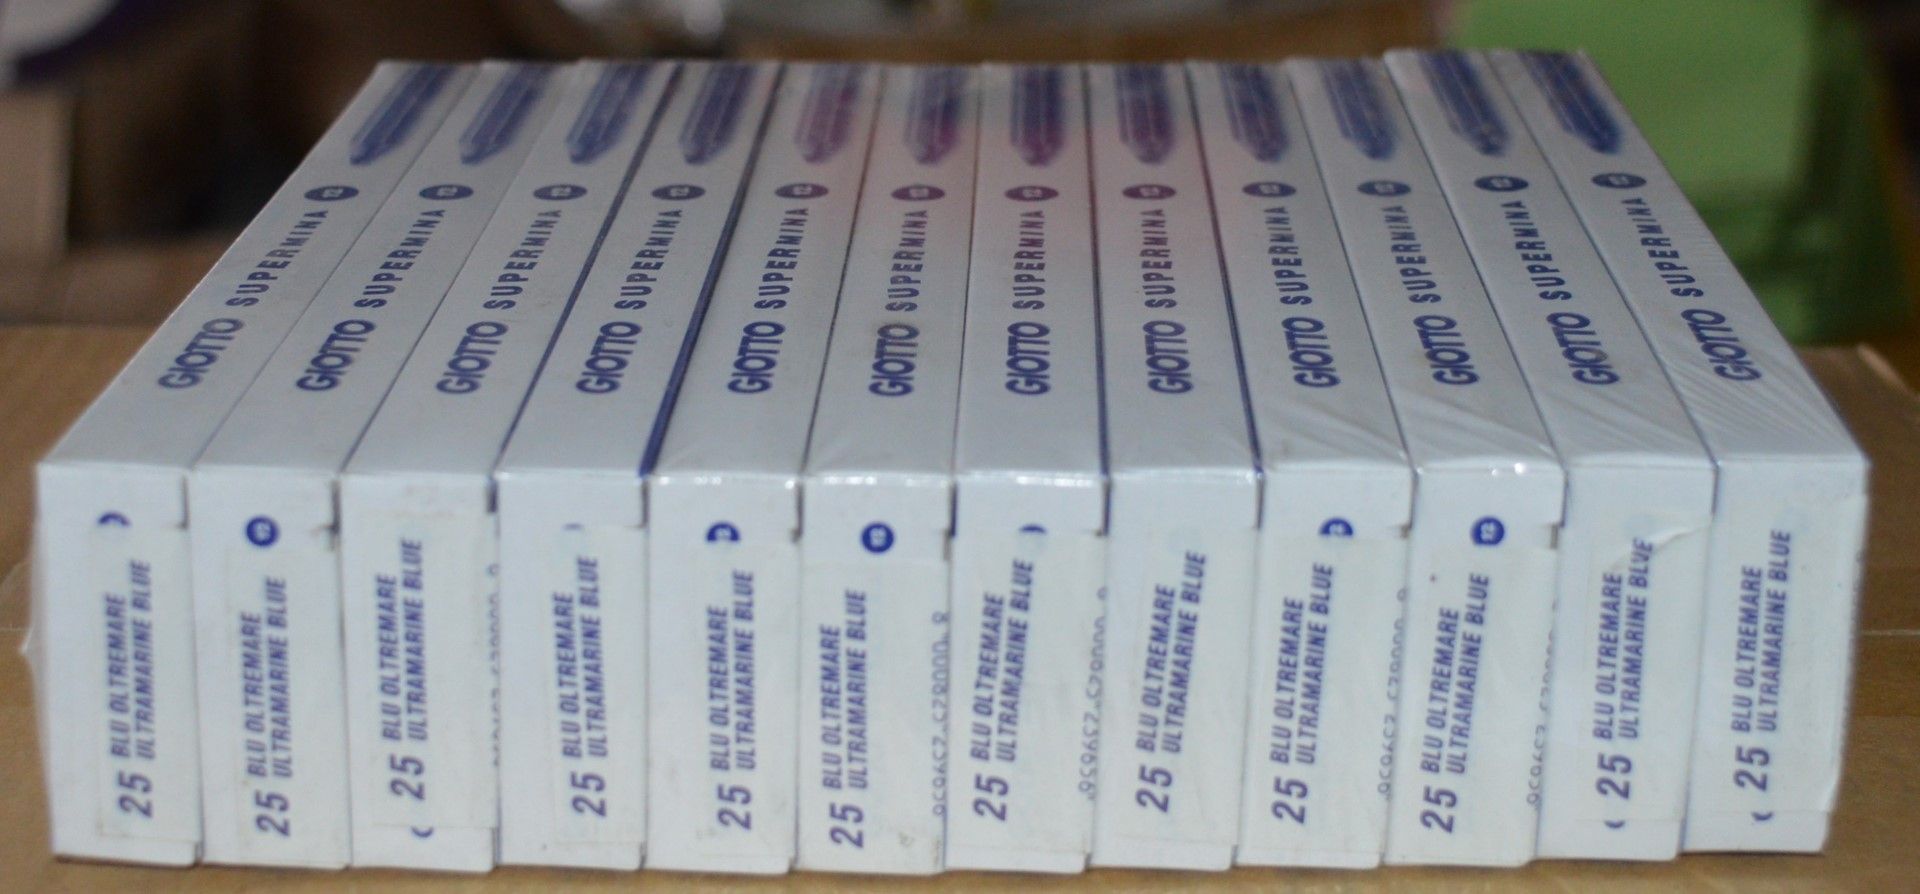 36 x Packs of Giotto Supermina 3.8mm Blue Pencils - High Quality Pencils Packed in Boxes of 12 - - Image 6 of 10